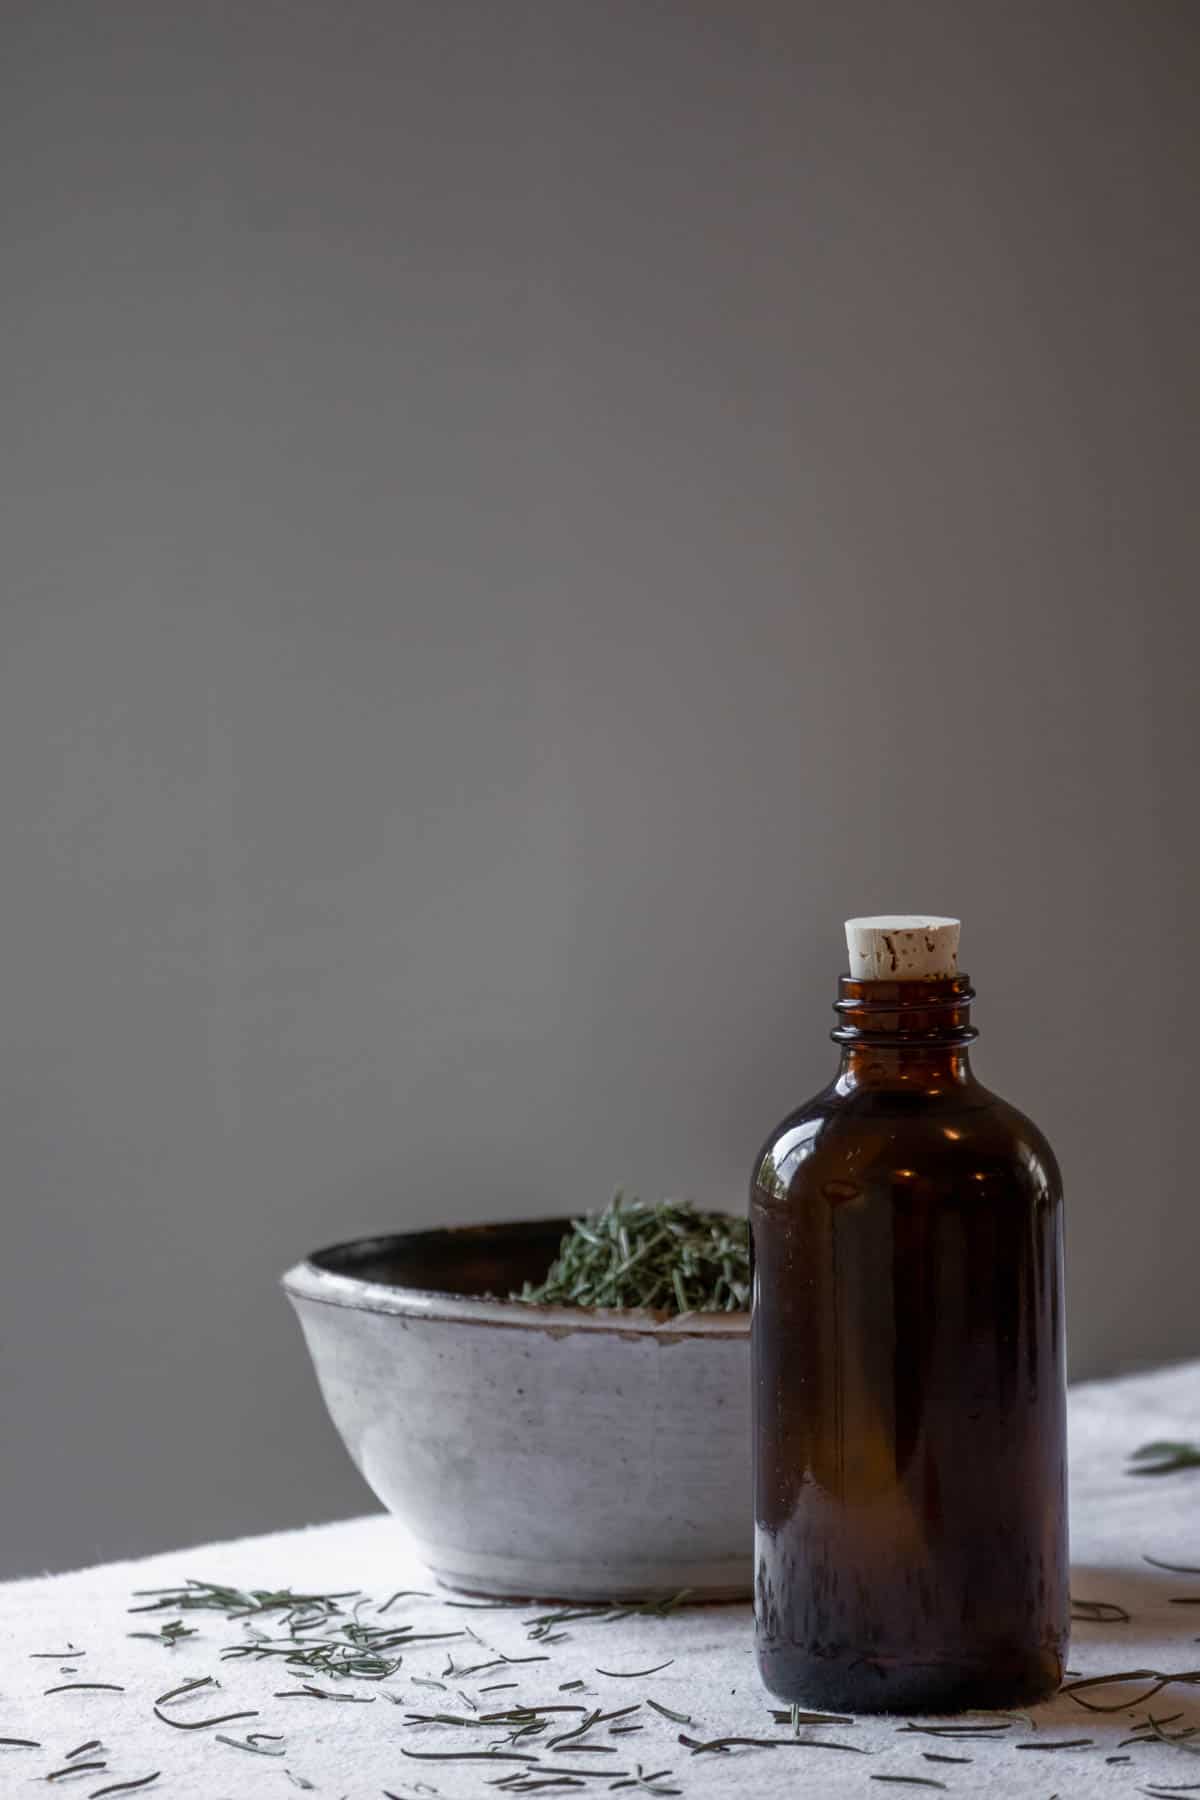 An apothecary bottle of rosemary oil